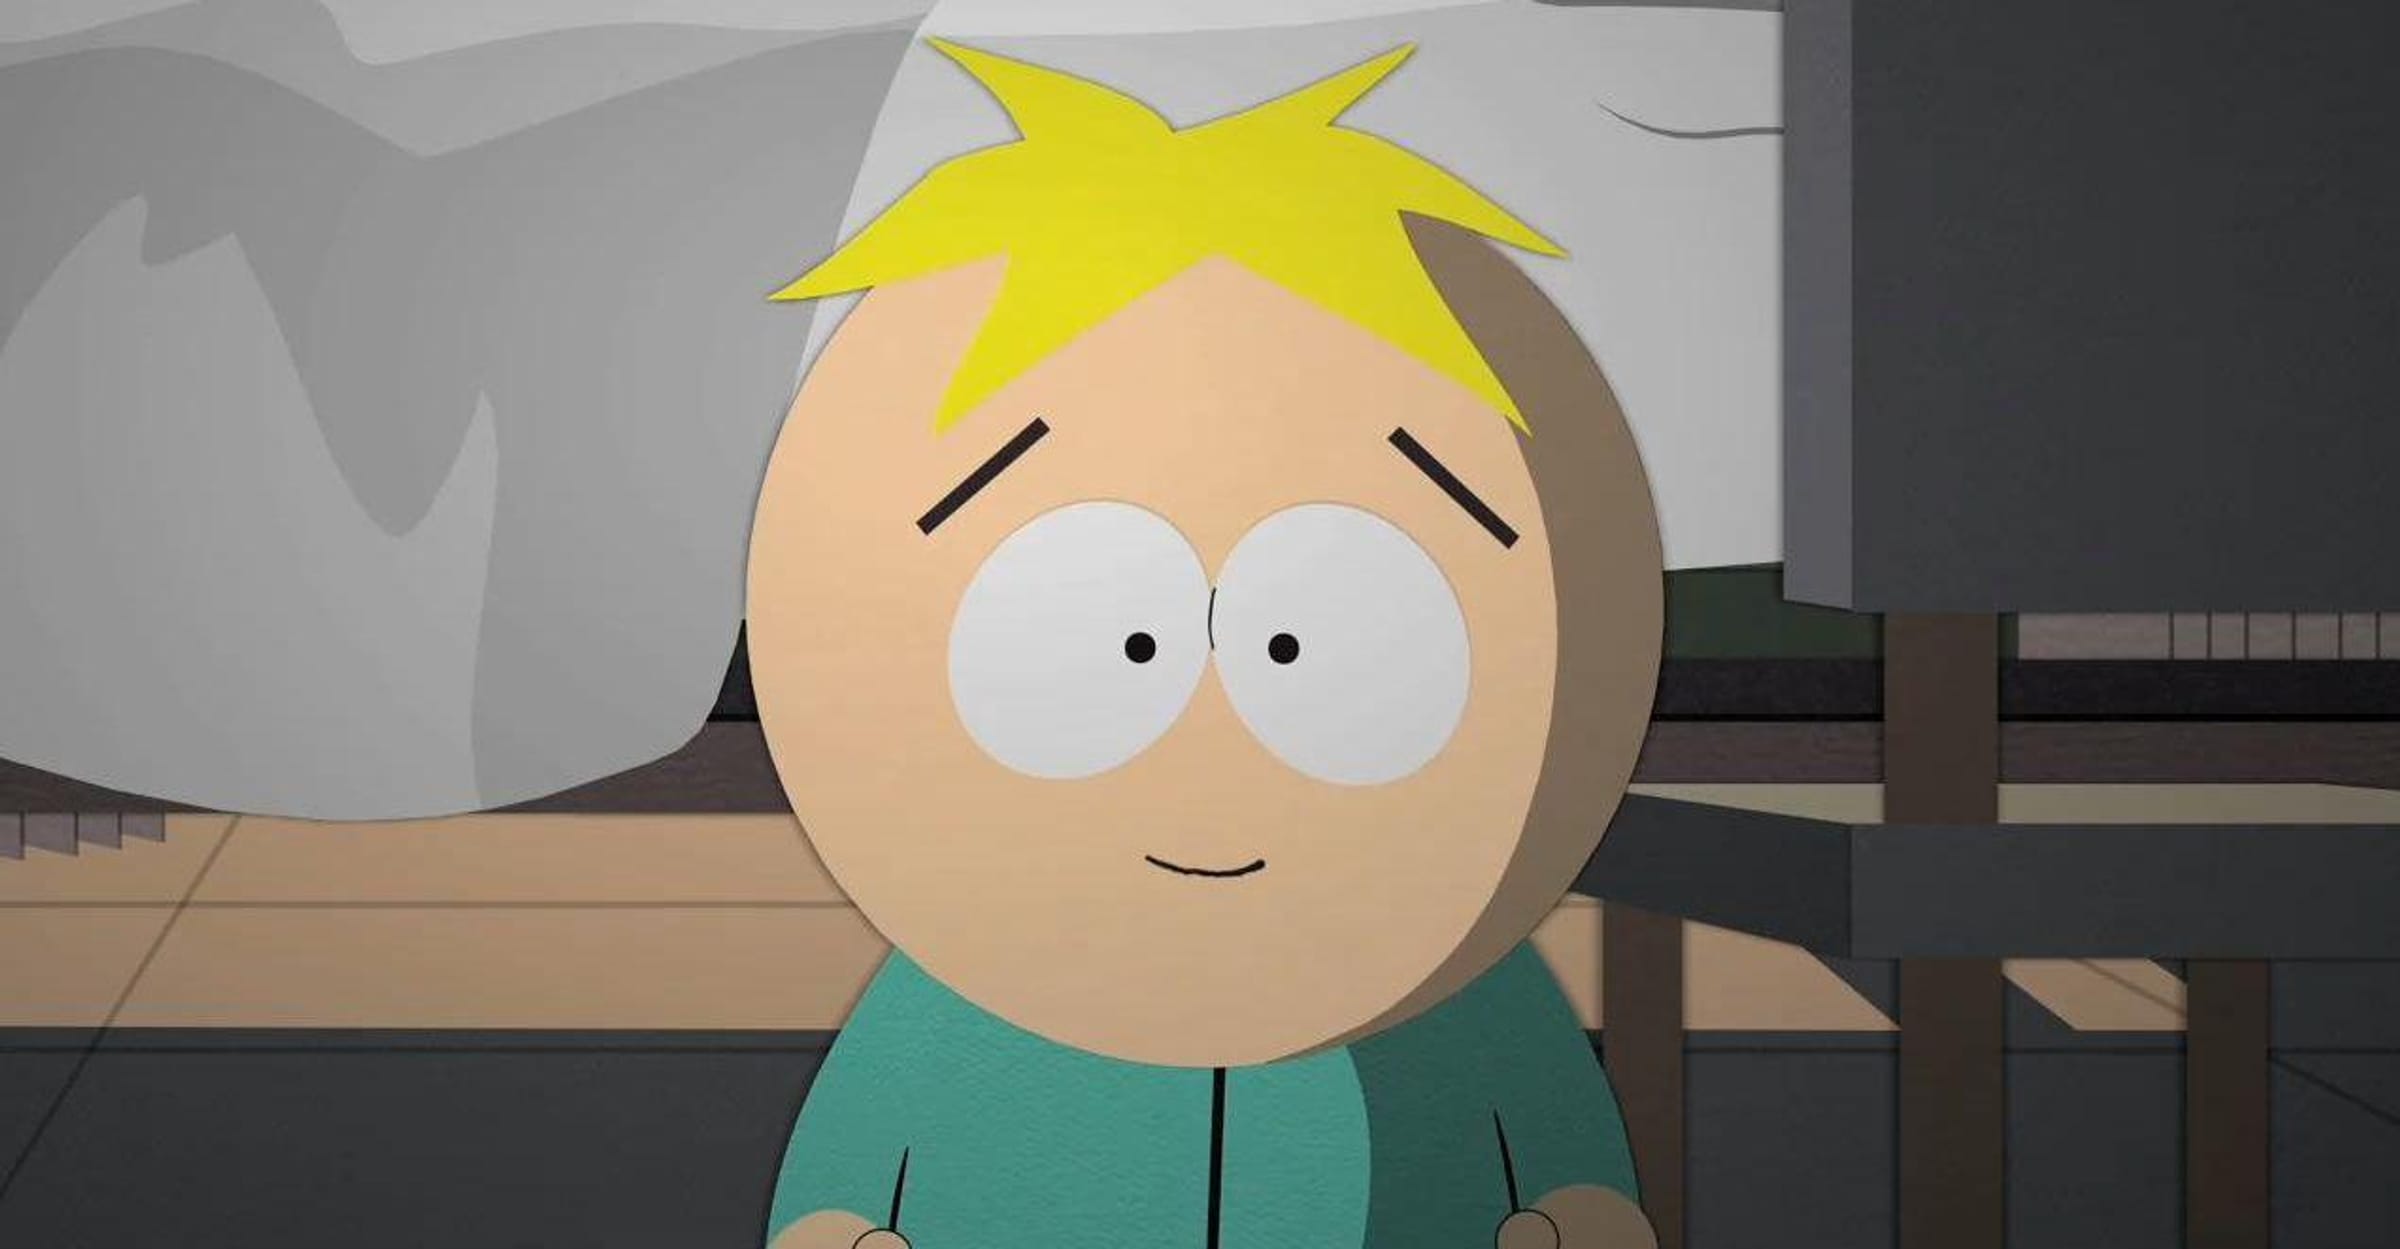 The Funniest Butters Quotes In South Park History Ranked